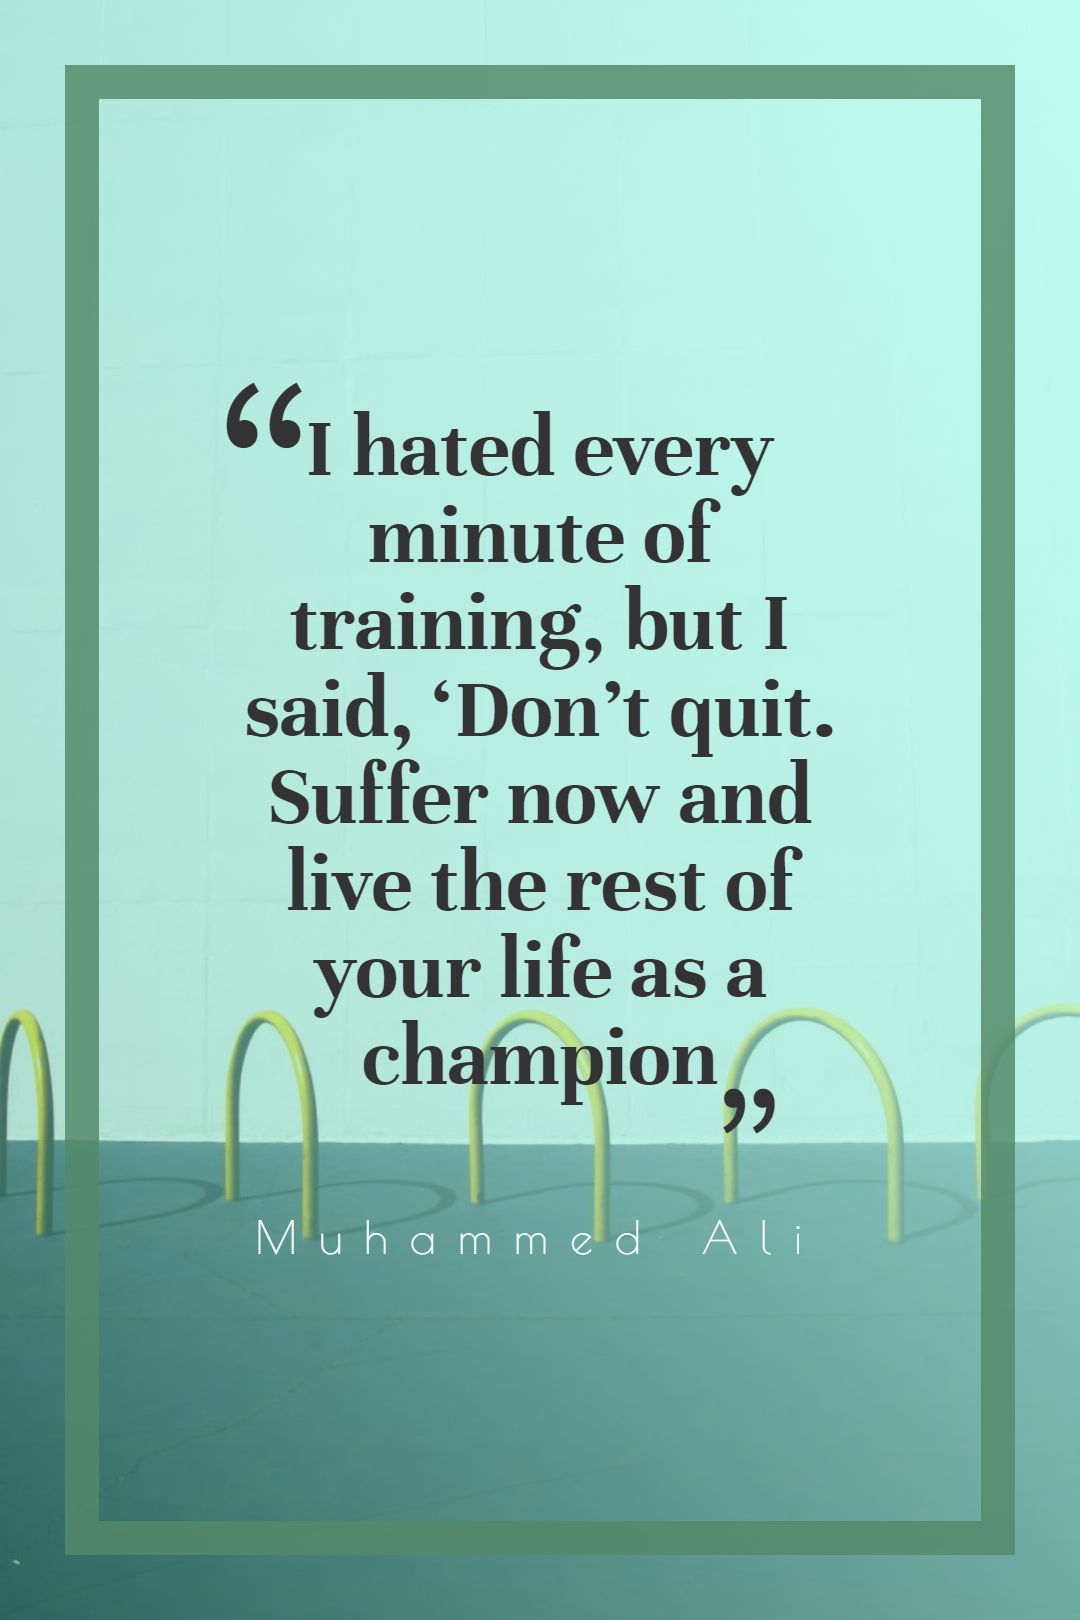 I hated every minute of training but I said ‘Don’t quit. Suffer now and live the rest of your life as a champion